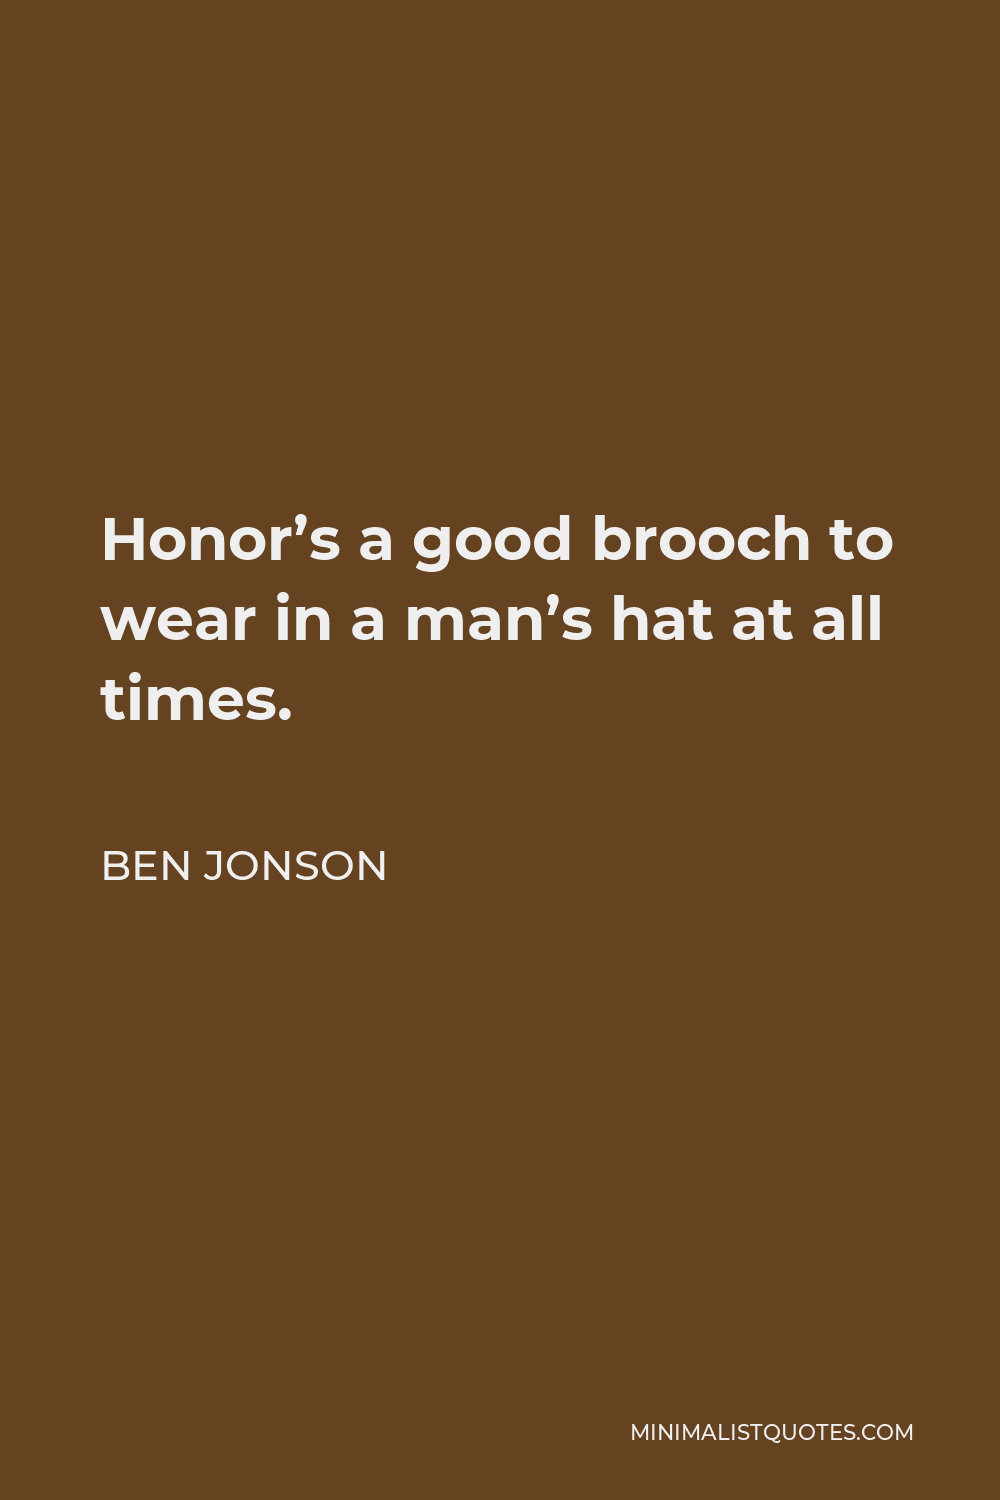 Ben Jonson Quote - Honor’s a good brooch to wear in a man’s hat at all times.